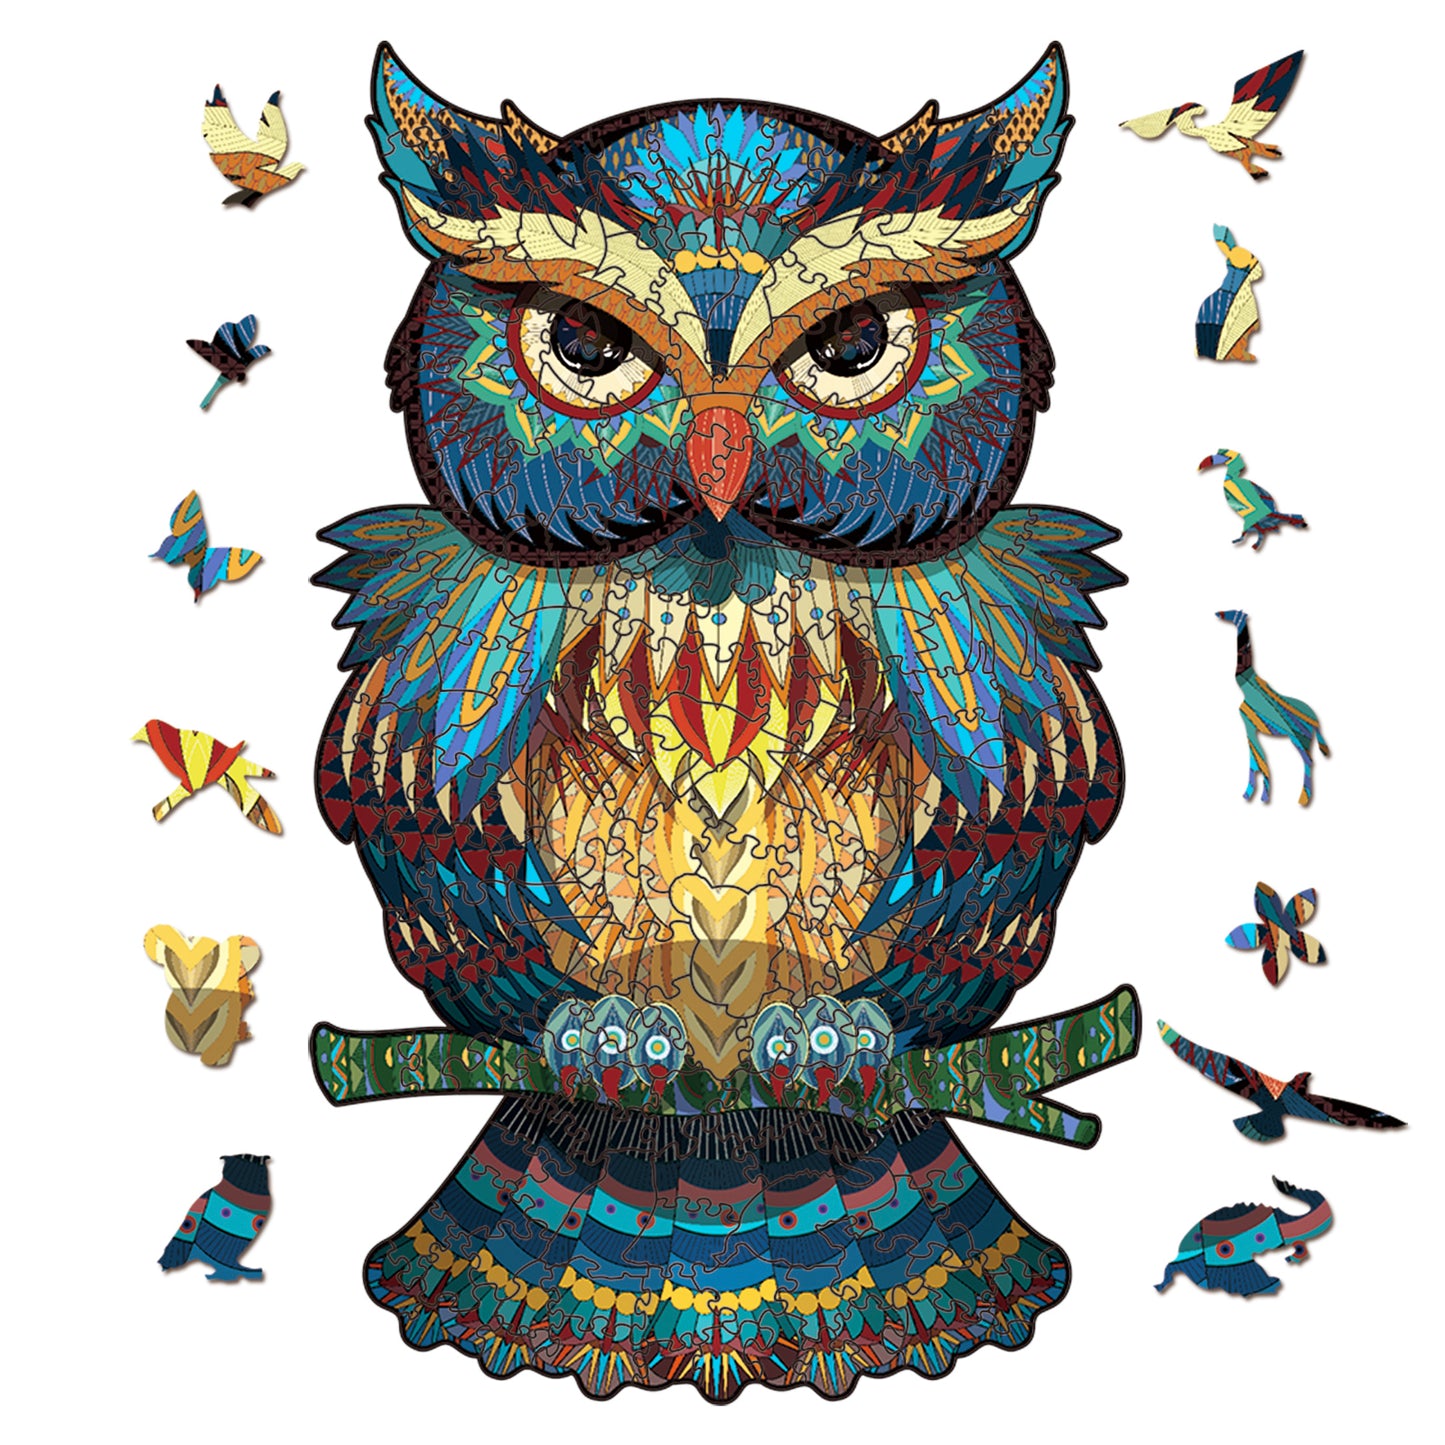 Tribal Owl Jigsaw Puzzles - Unique Shaped Wooden Puzzles